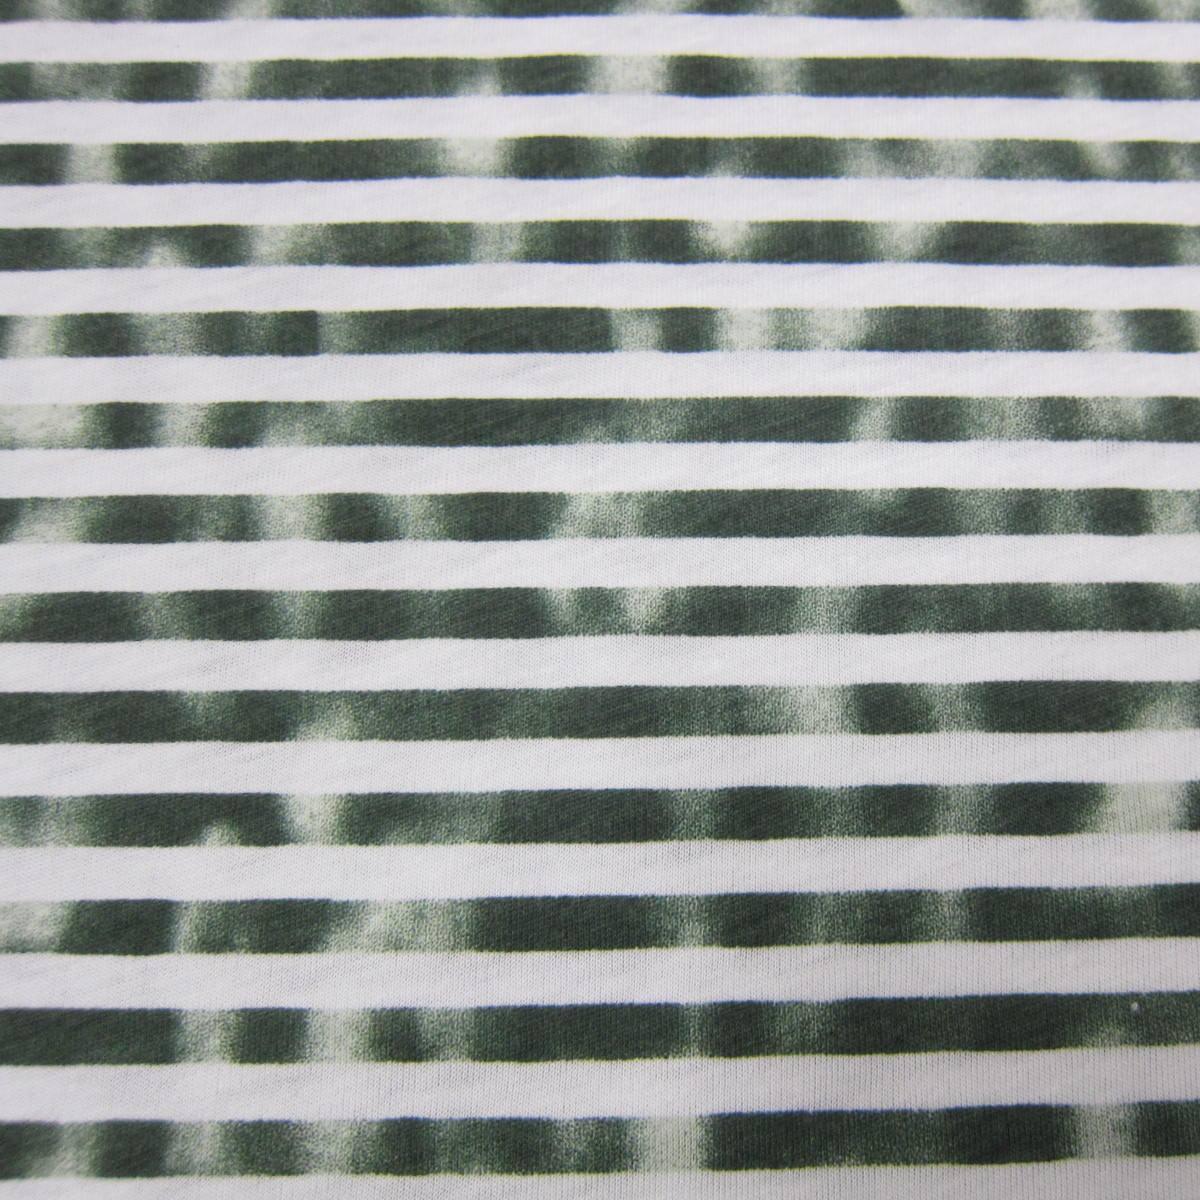 Green and White 1/4" Twinkle Stripes on Cotton Jersey